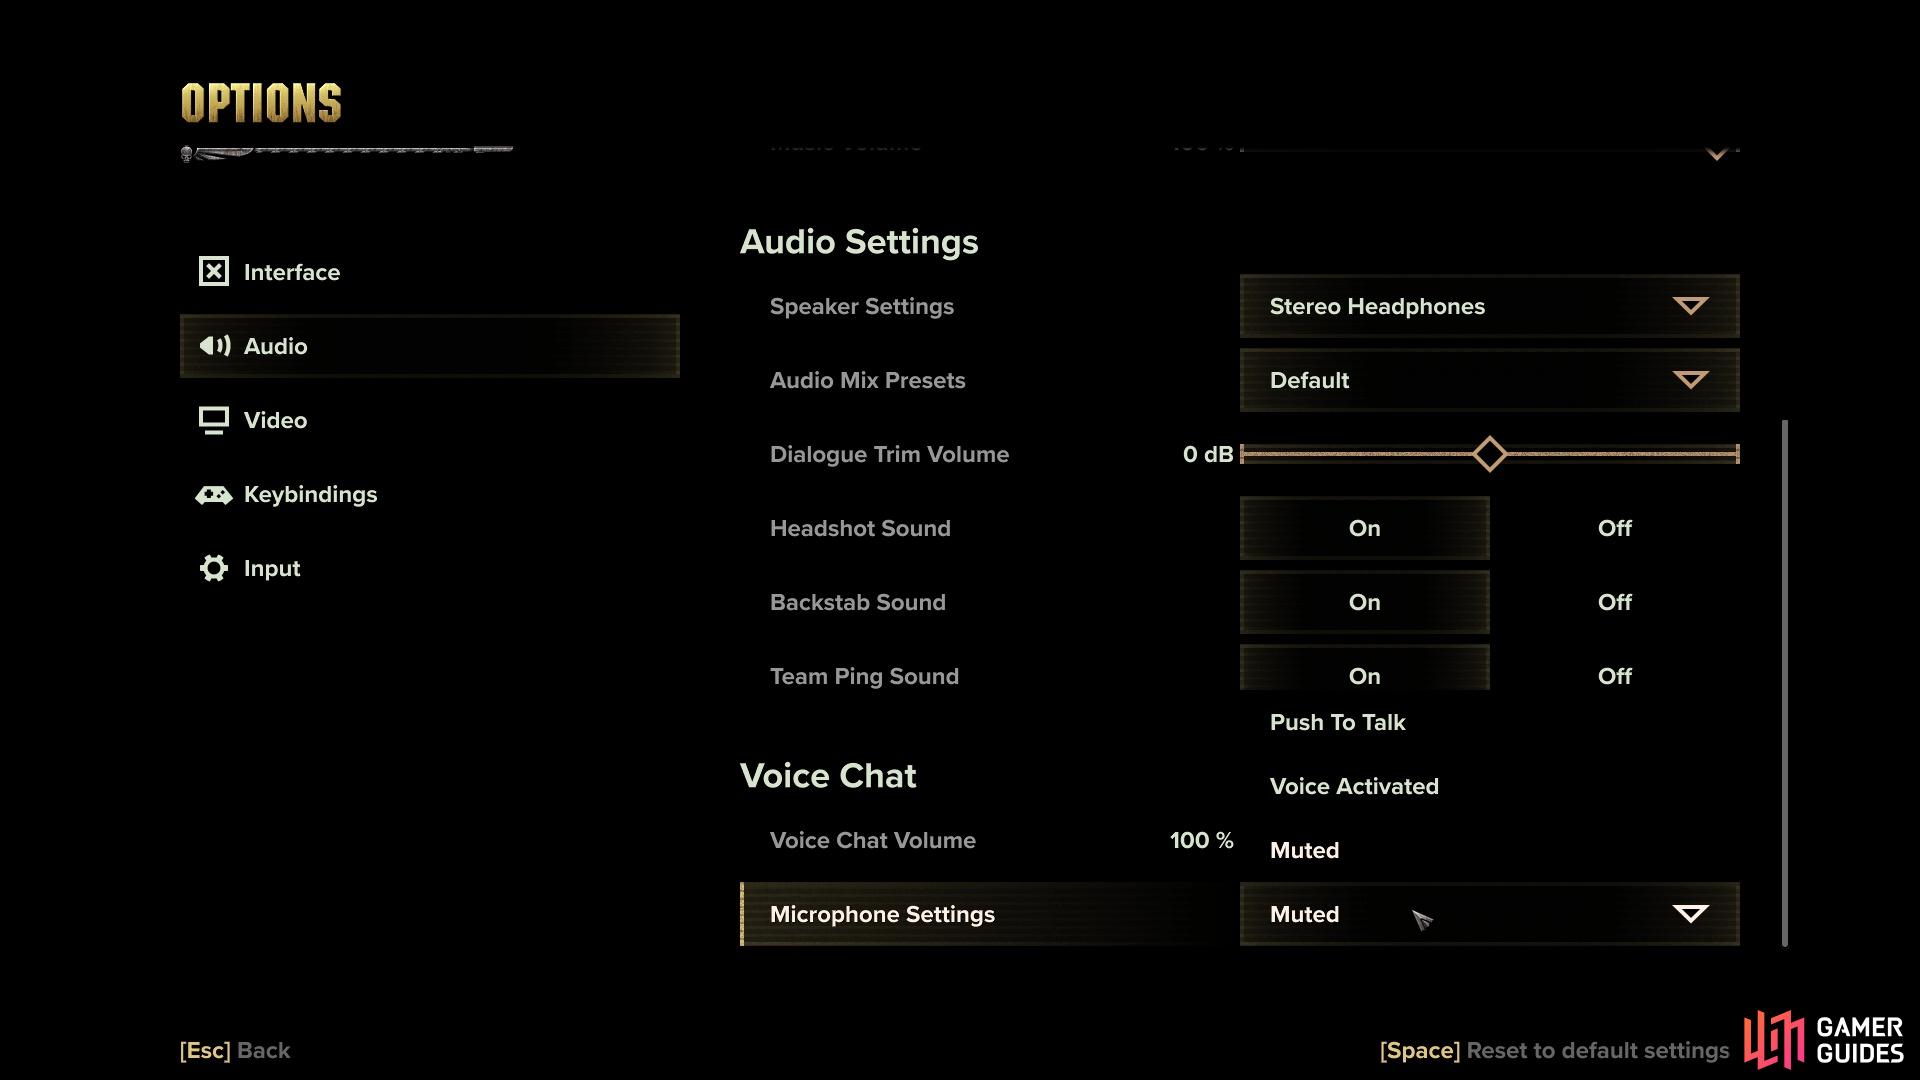 You need to head into the audio options to enable the mic for chatting to your team.